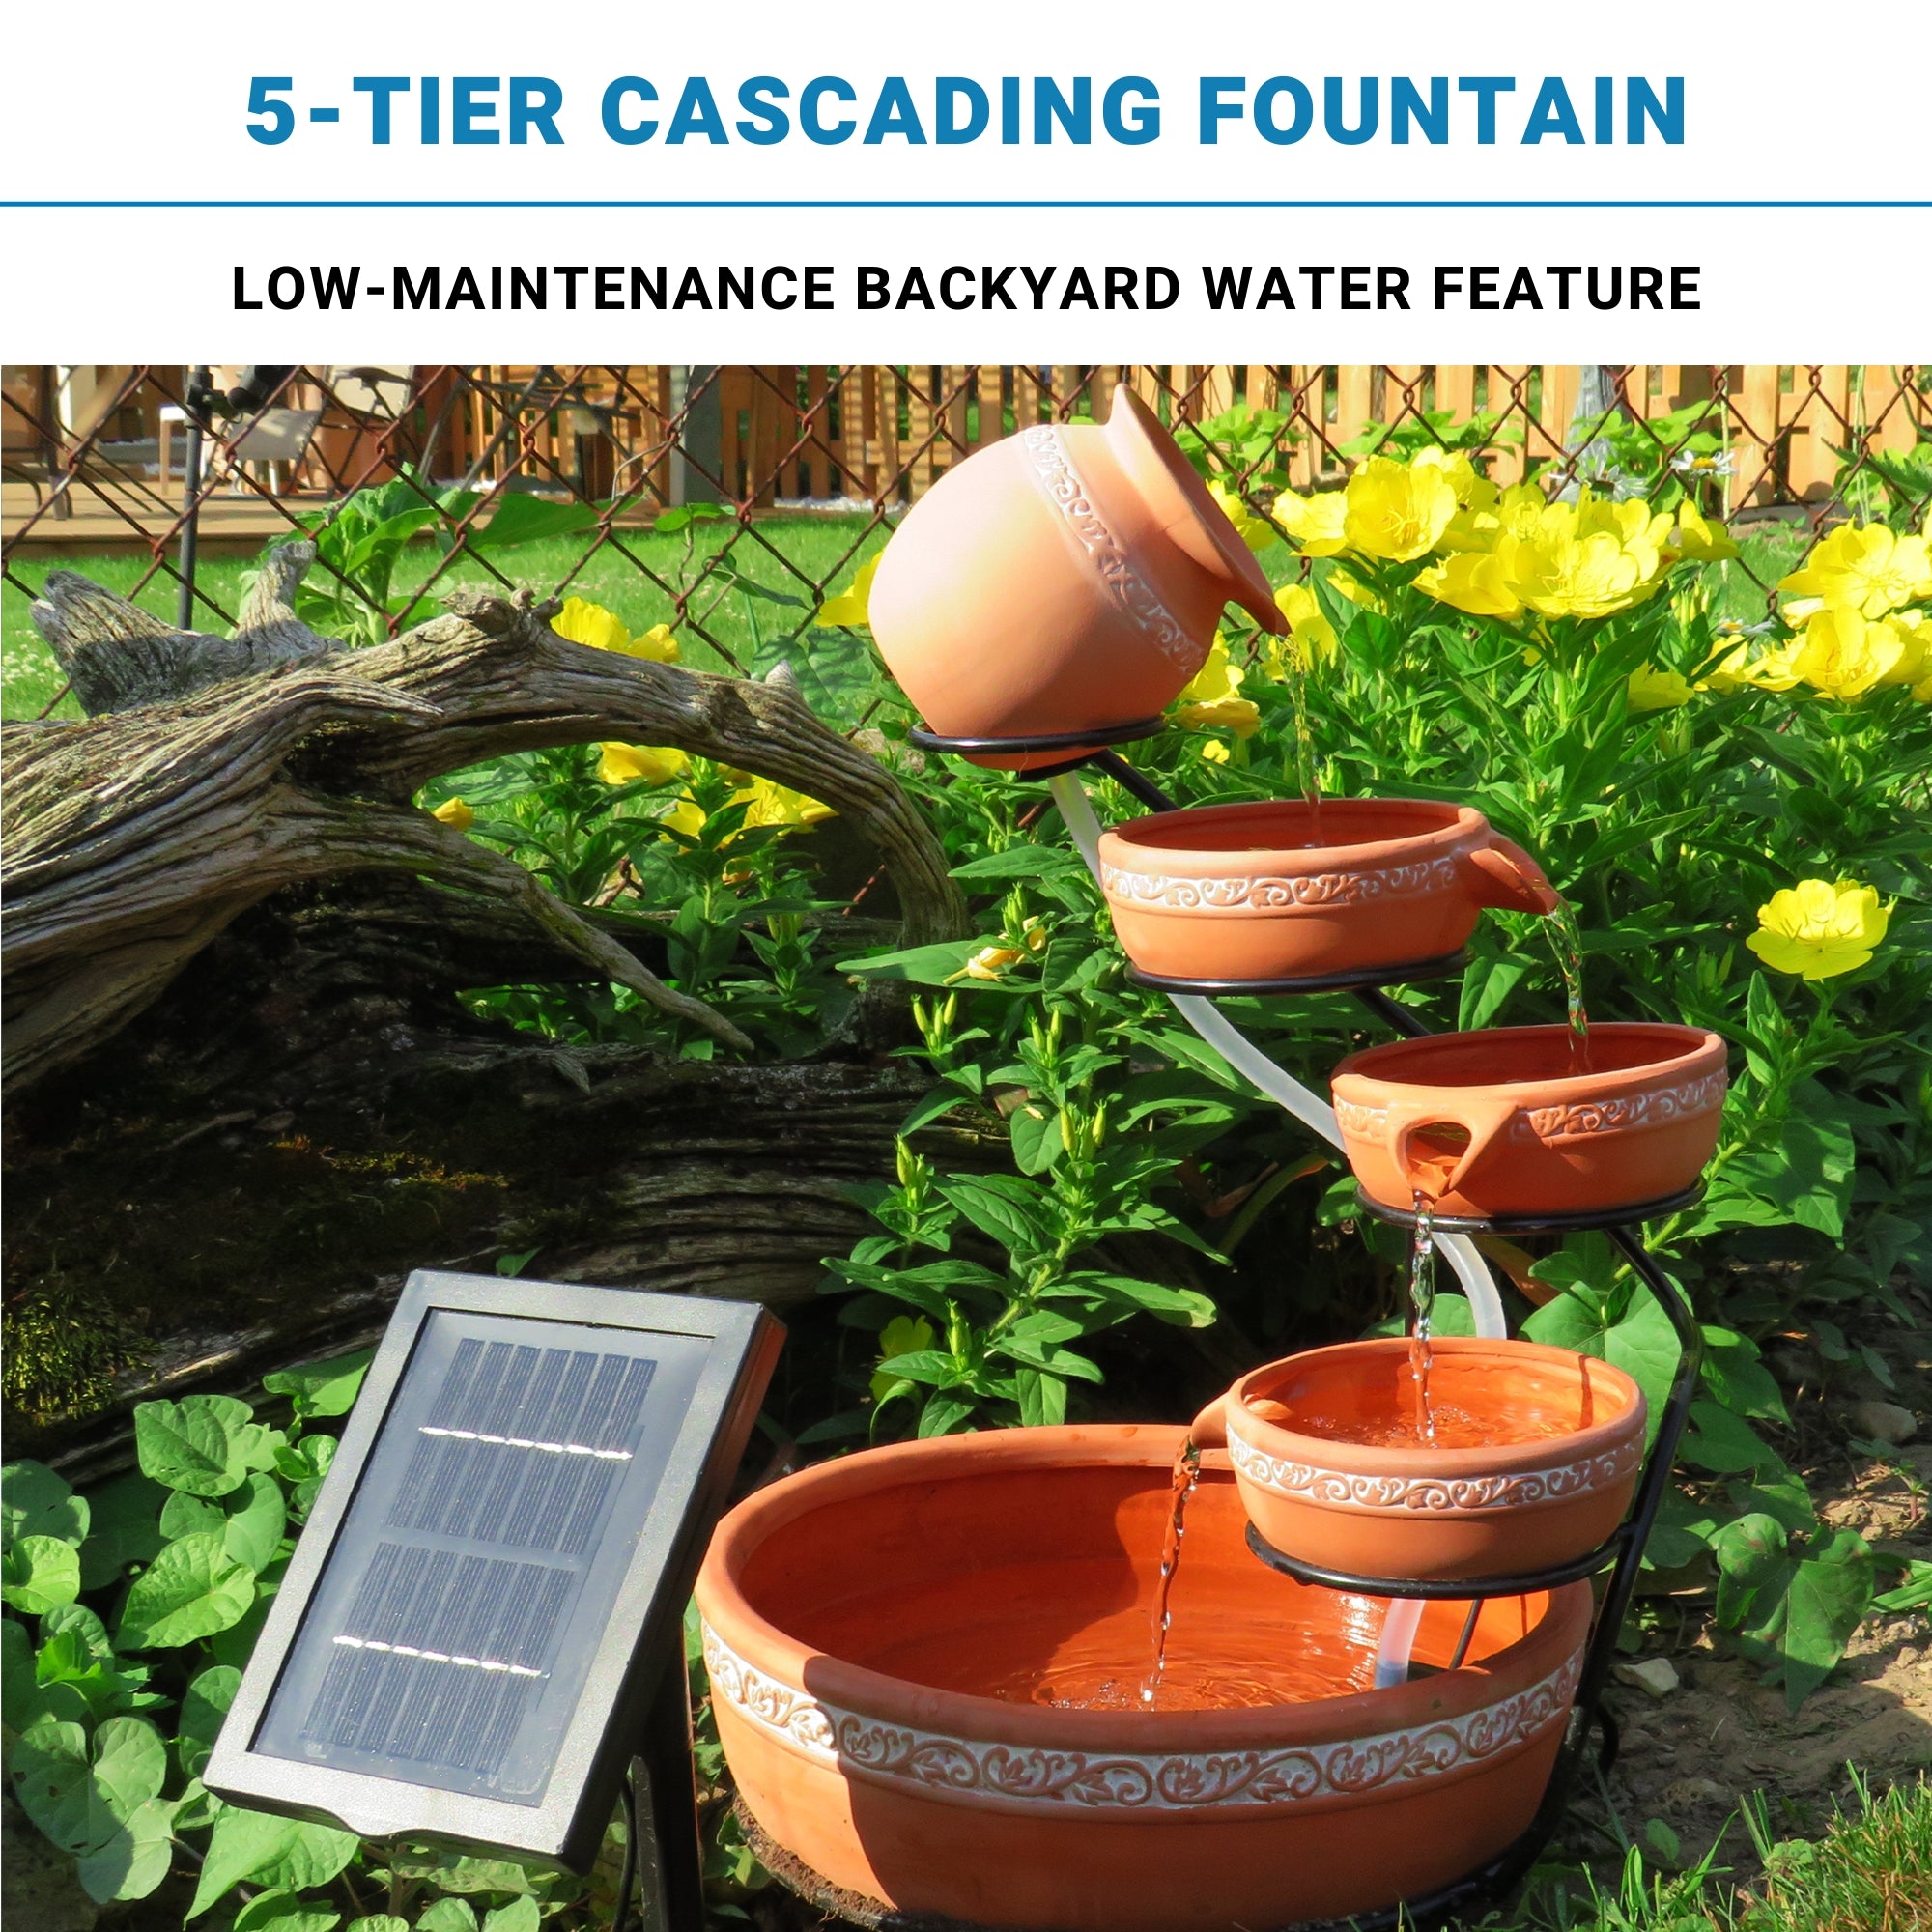 Koolscapes solar powered 5-tier cascading fountain and solar panel set up in a garden with yellow flowers. Text above reads, "5-tier cascading fountain: Low-maintenance backyard water feature."